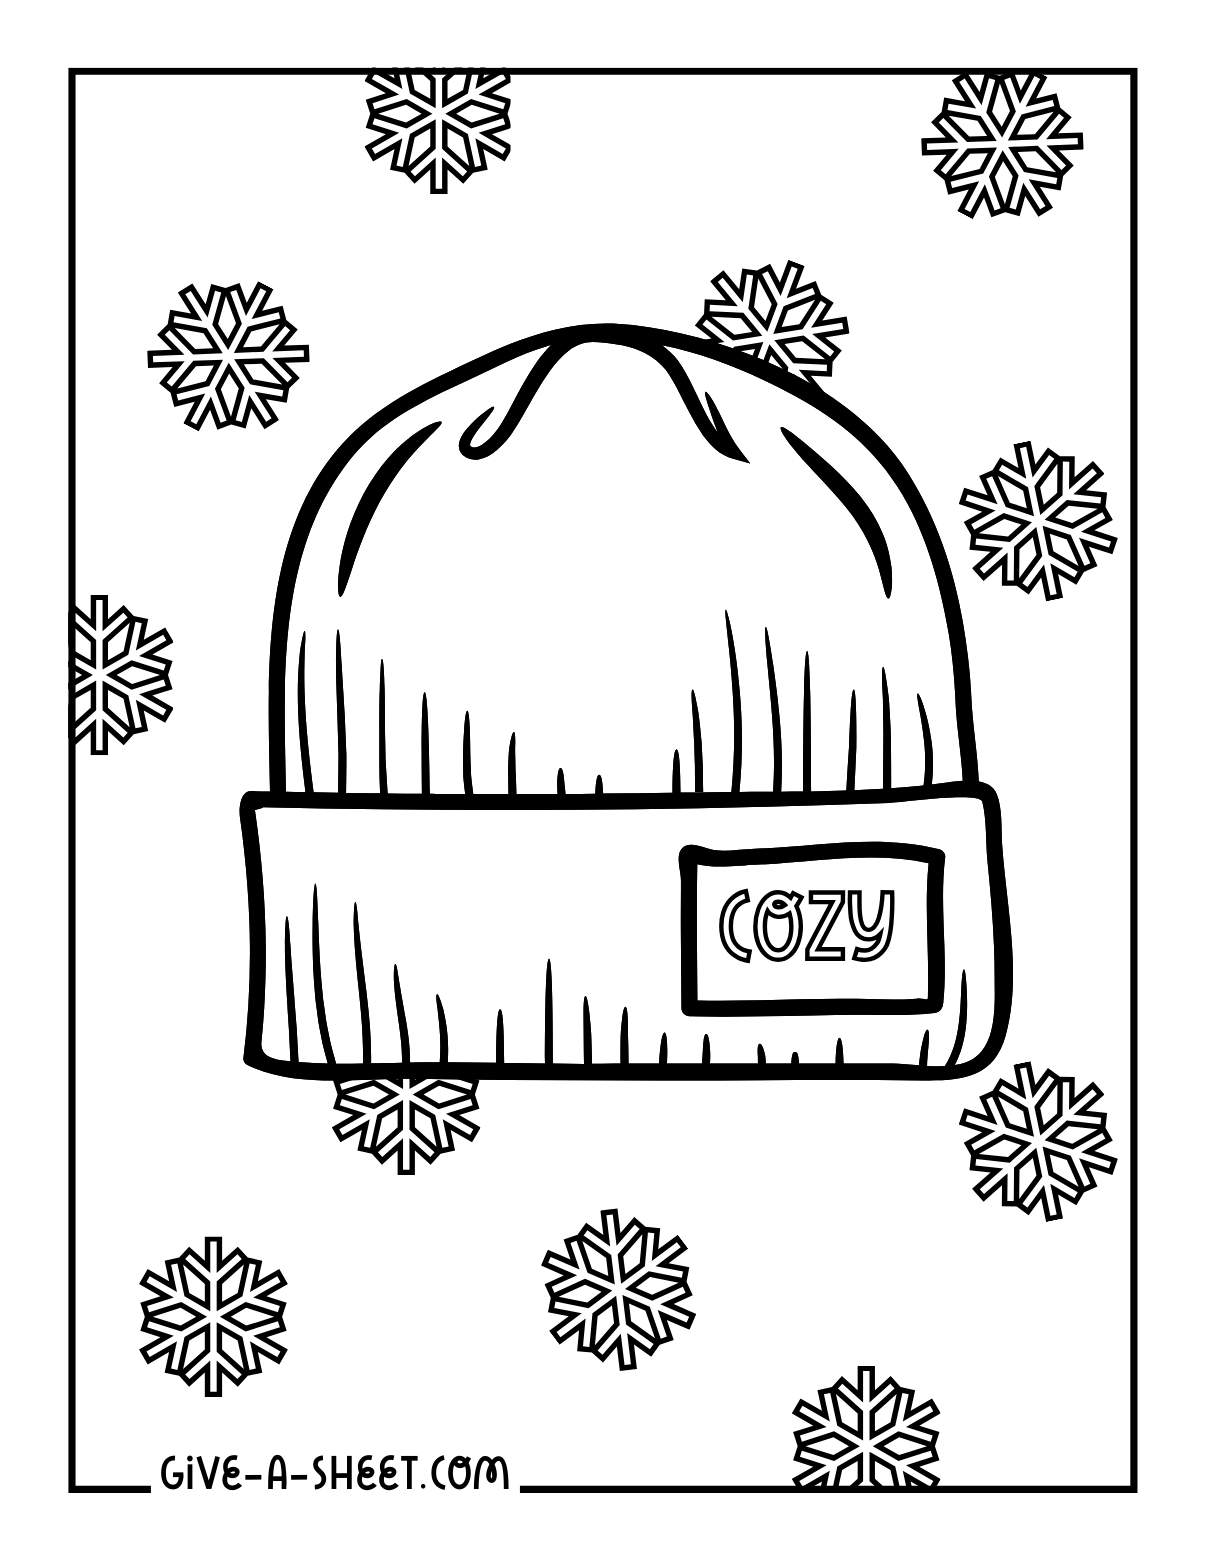 Cozy winter beanie coloring page.